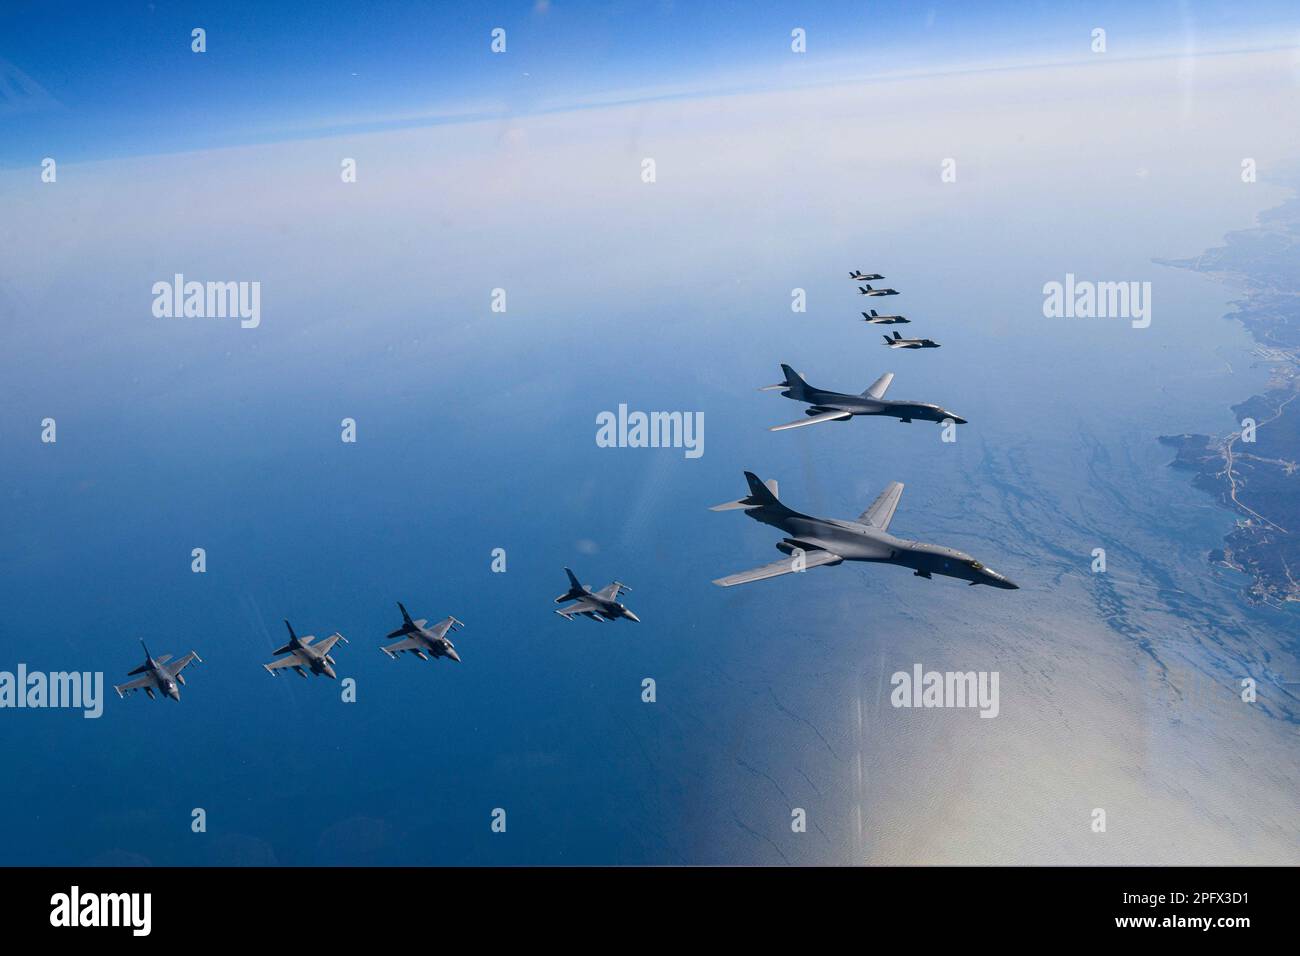 March 19, 2023, OSAN, GYEONGGI, SOUTH KOREA: March 19, 2023-West Sea, South Korea-In this photo provided by South Korea Defense Ministry, U.S. Air Force B-1B bombers, top center, fly in formation with South Korea's Air Force F-35A fighter jets and U.S. Air Force F-16 fighter jets, top right, over the South Korea Peninsula during a joint air drill in South Korea, Sunday, March 19, 2023. North Korea launched a short-range ballistic missile toward the sea on Sunday, its neighbors said, ramping up testing activities in response to U.S.-South Korean military drills that it views as an invasion rehe Stock Photo